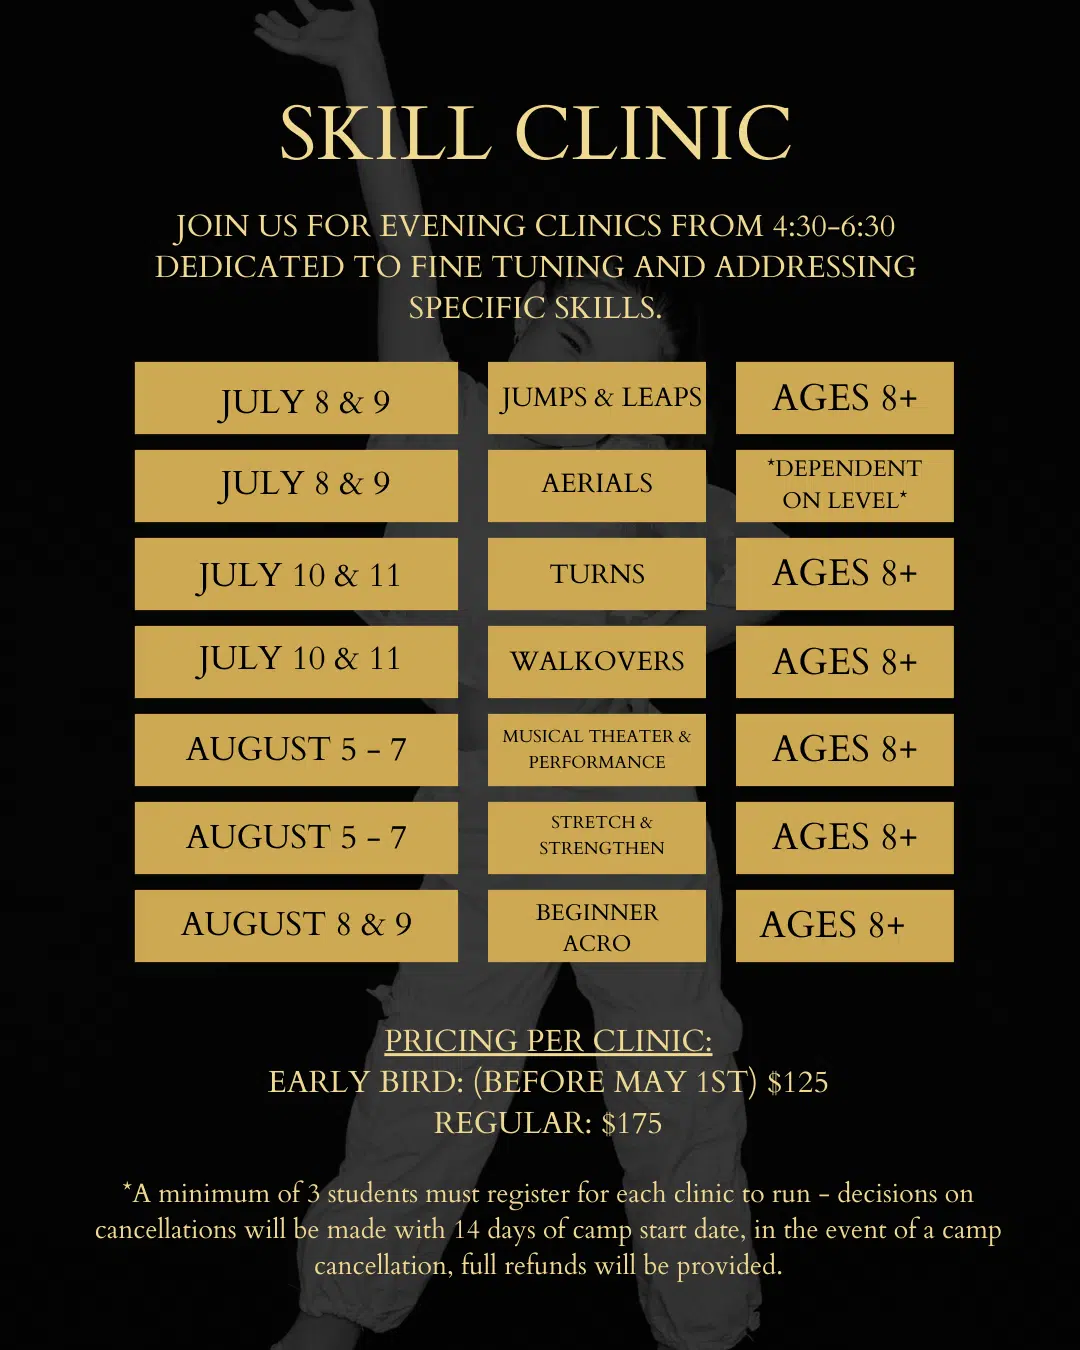 Holy City Dance's skill clinic from 4:30-6:30 during July and August